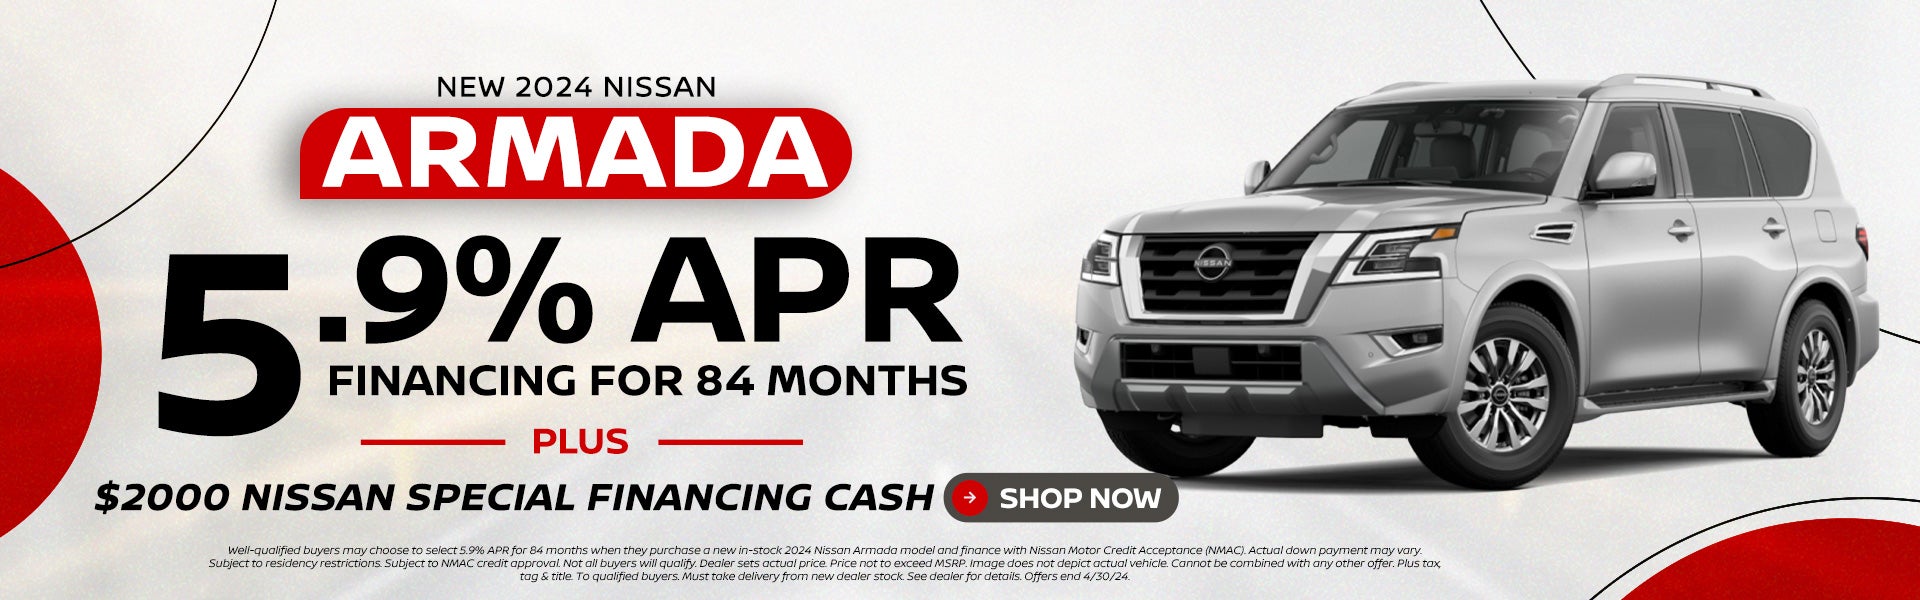 2023 Nissan Armada 5.9% for 84 Months with $2000 Cash